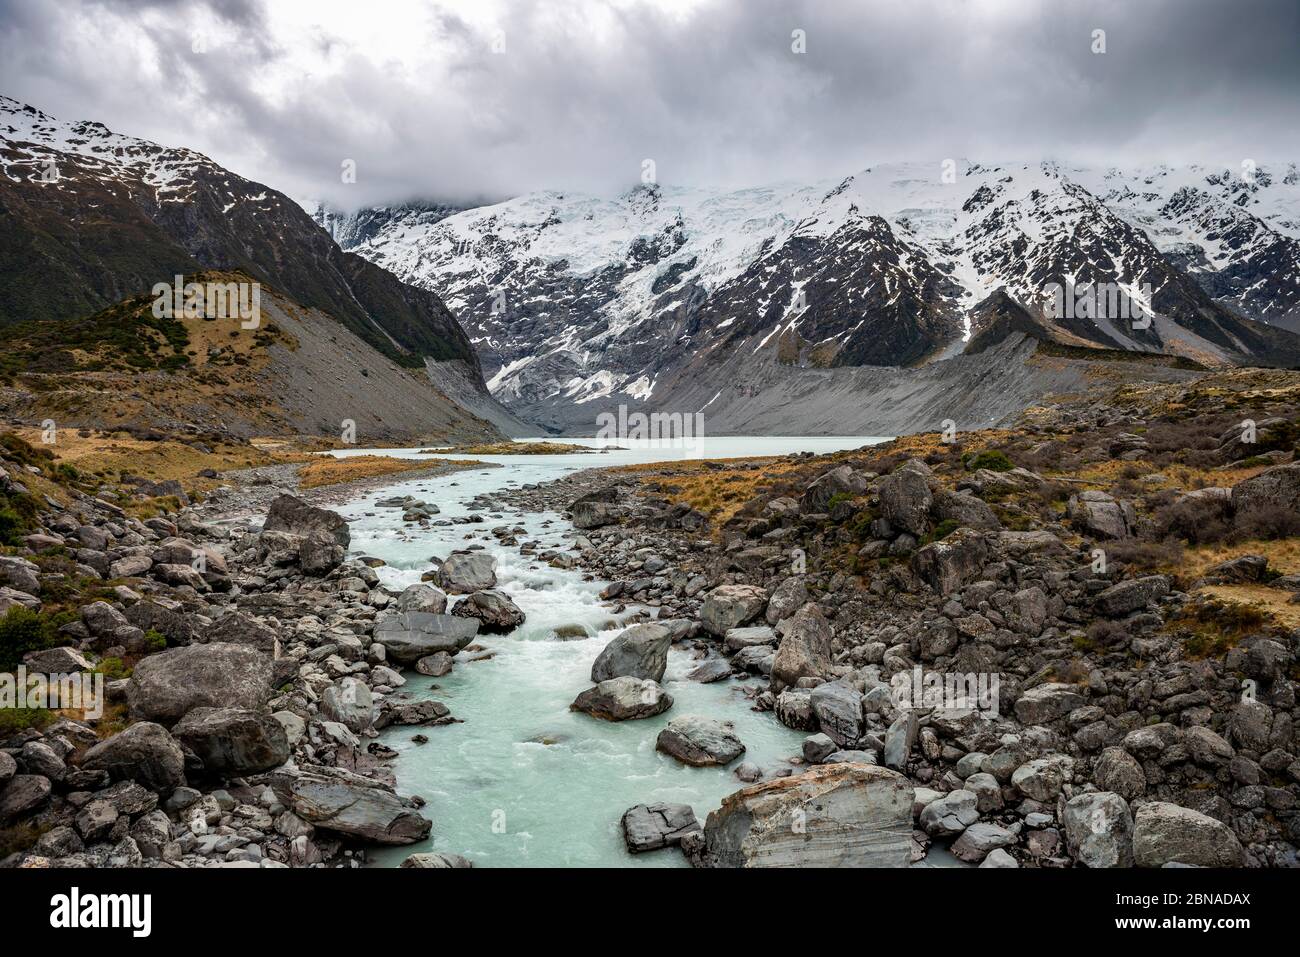 Hooker River and Hooker Lake, Mount Cook, Mount Cook National Park, Southern Alps, Hooker Valley, Canterbury Region, South Island, New Zealand, Oceani Stock Photo